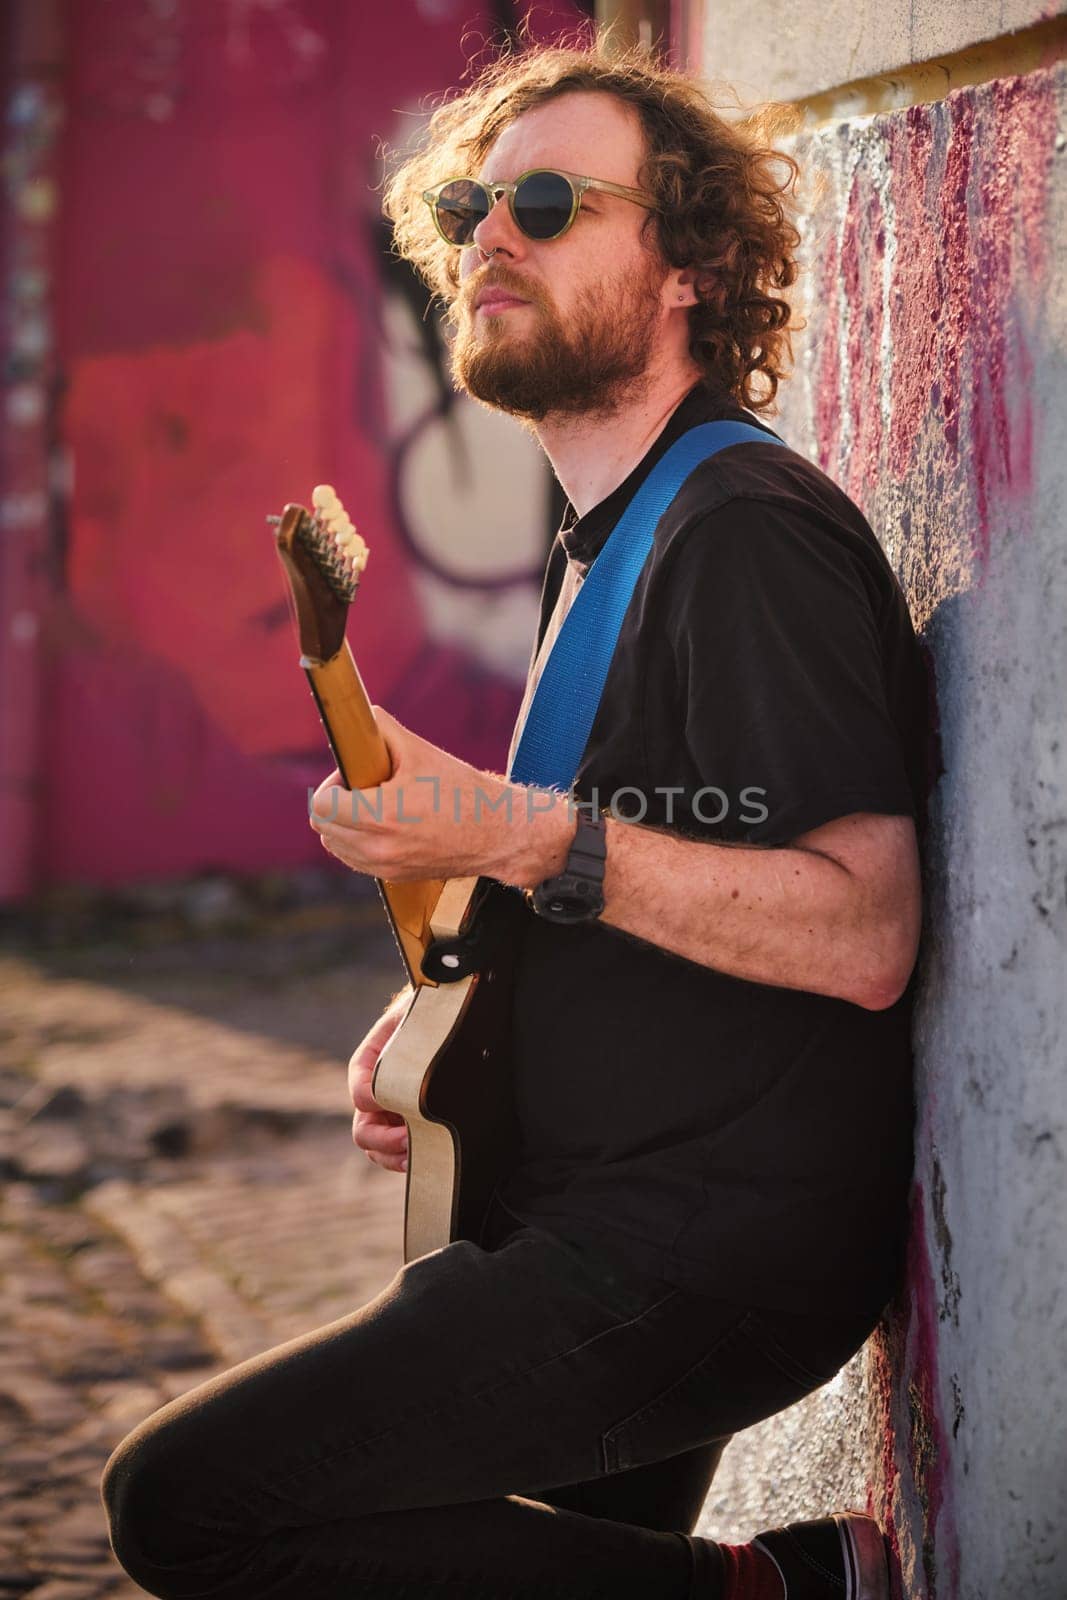 Street musician playing electric guitar in the street by dimol